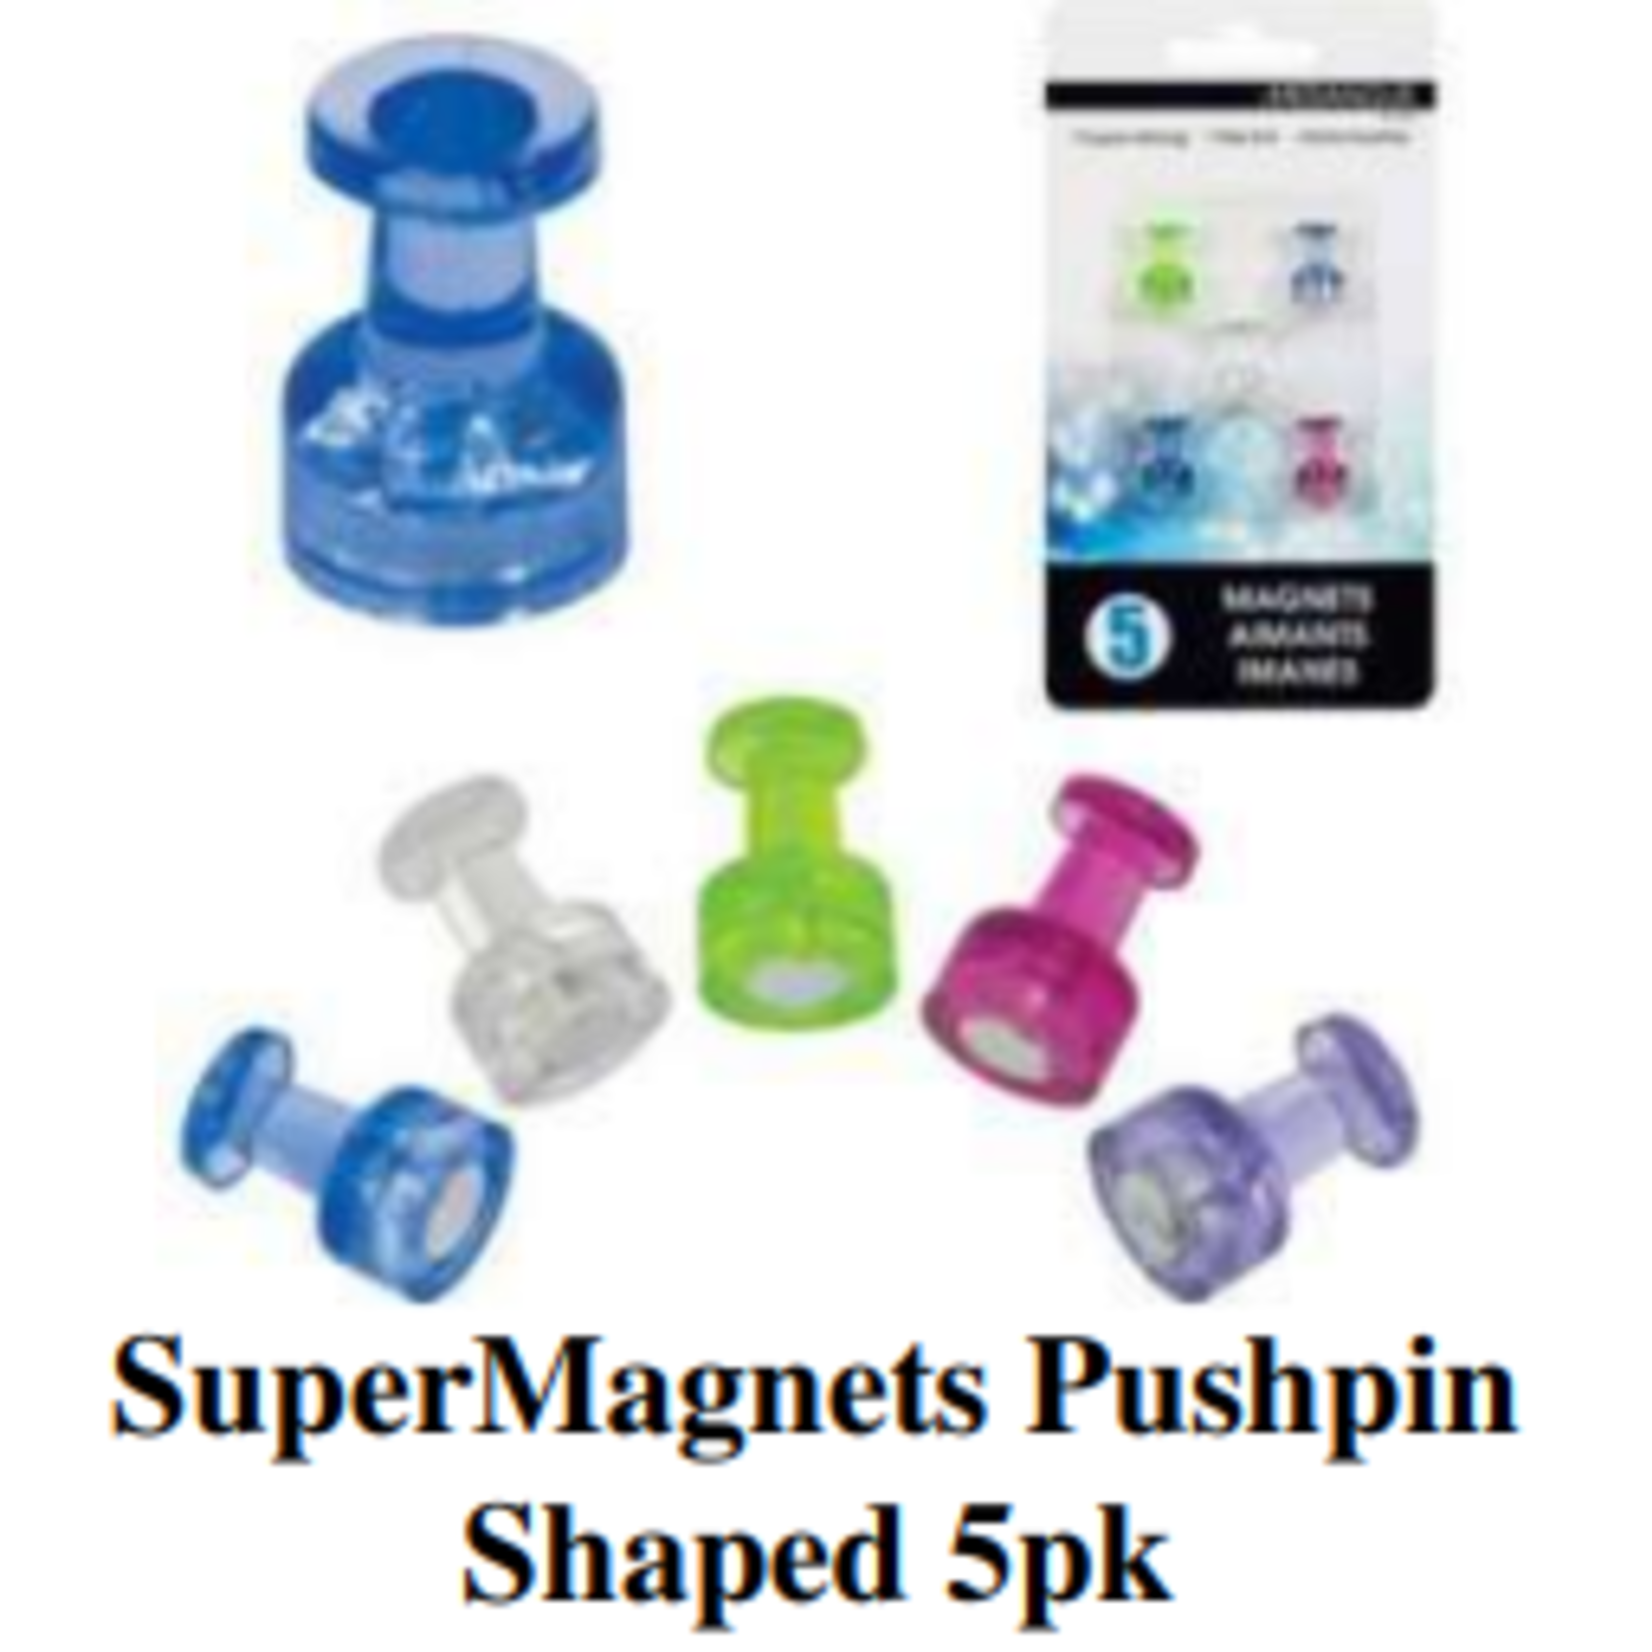 Magnets - Push pin style